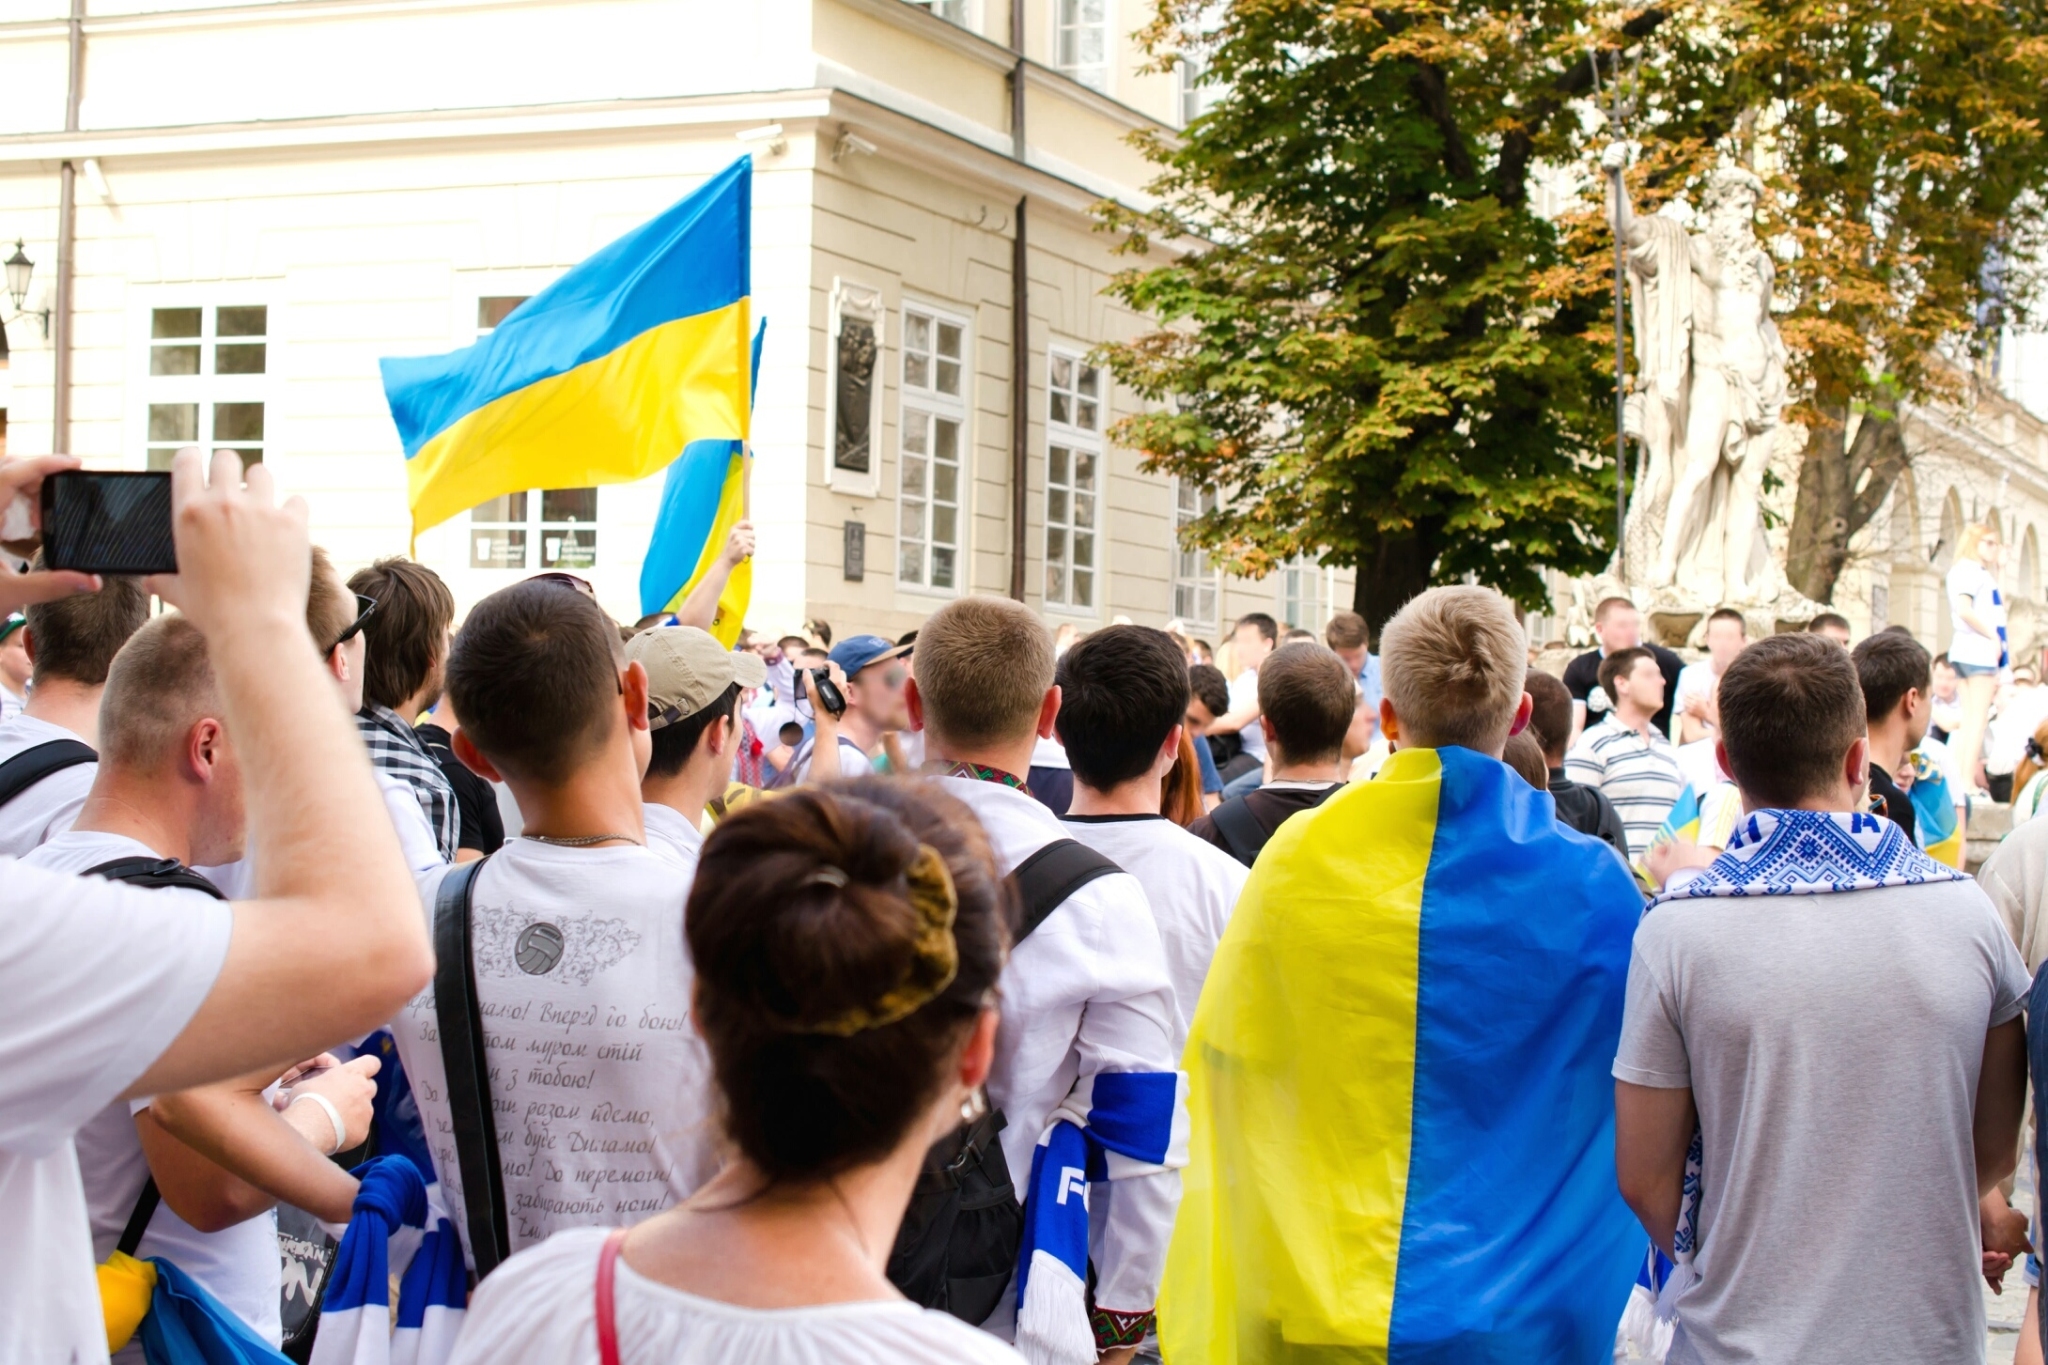 People marching in Ukraine with Flags